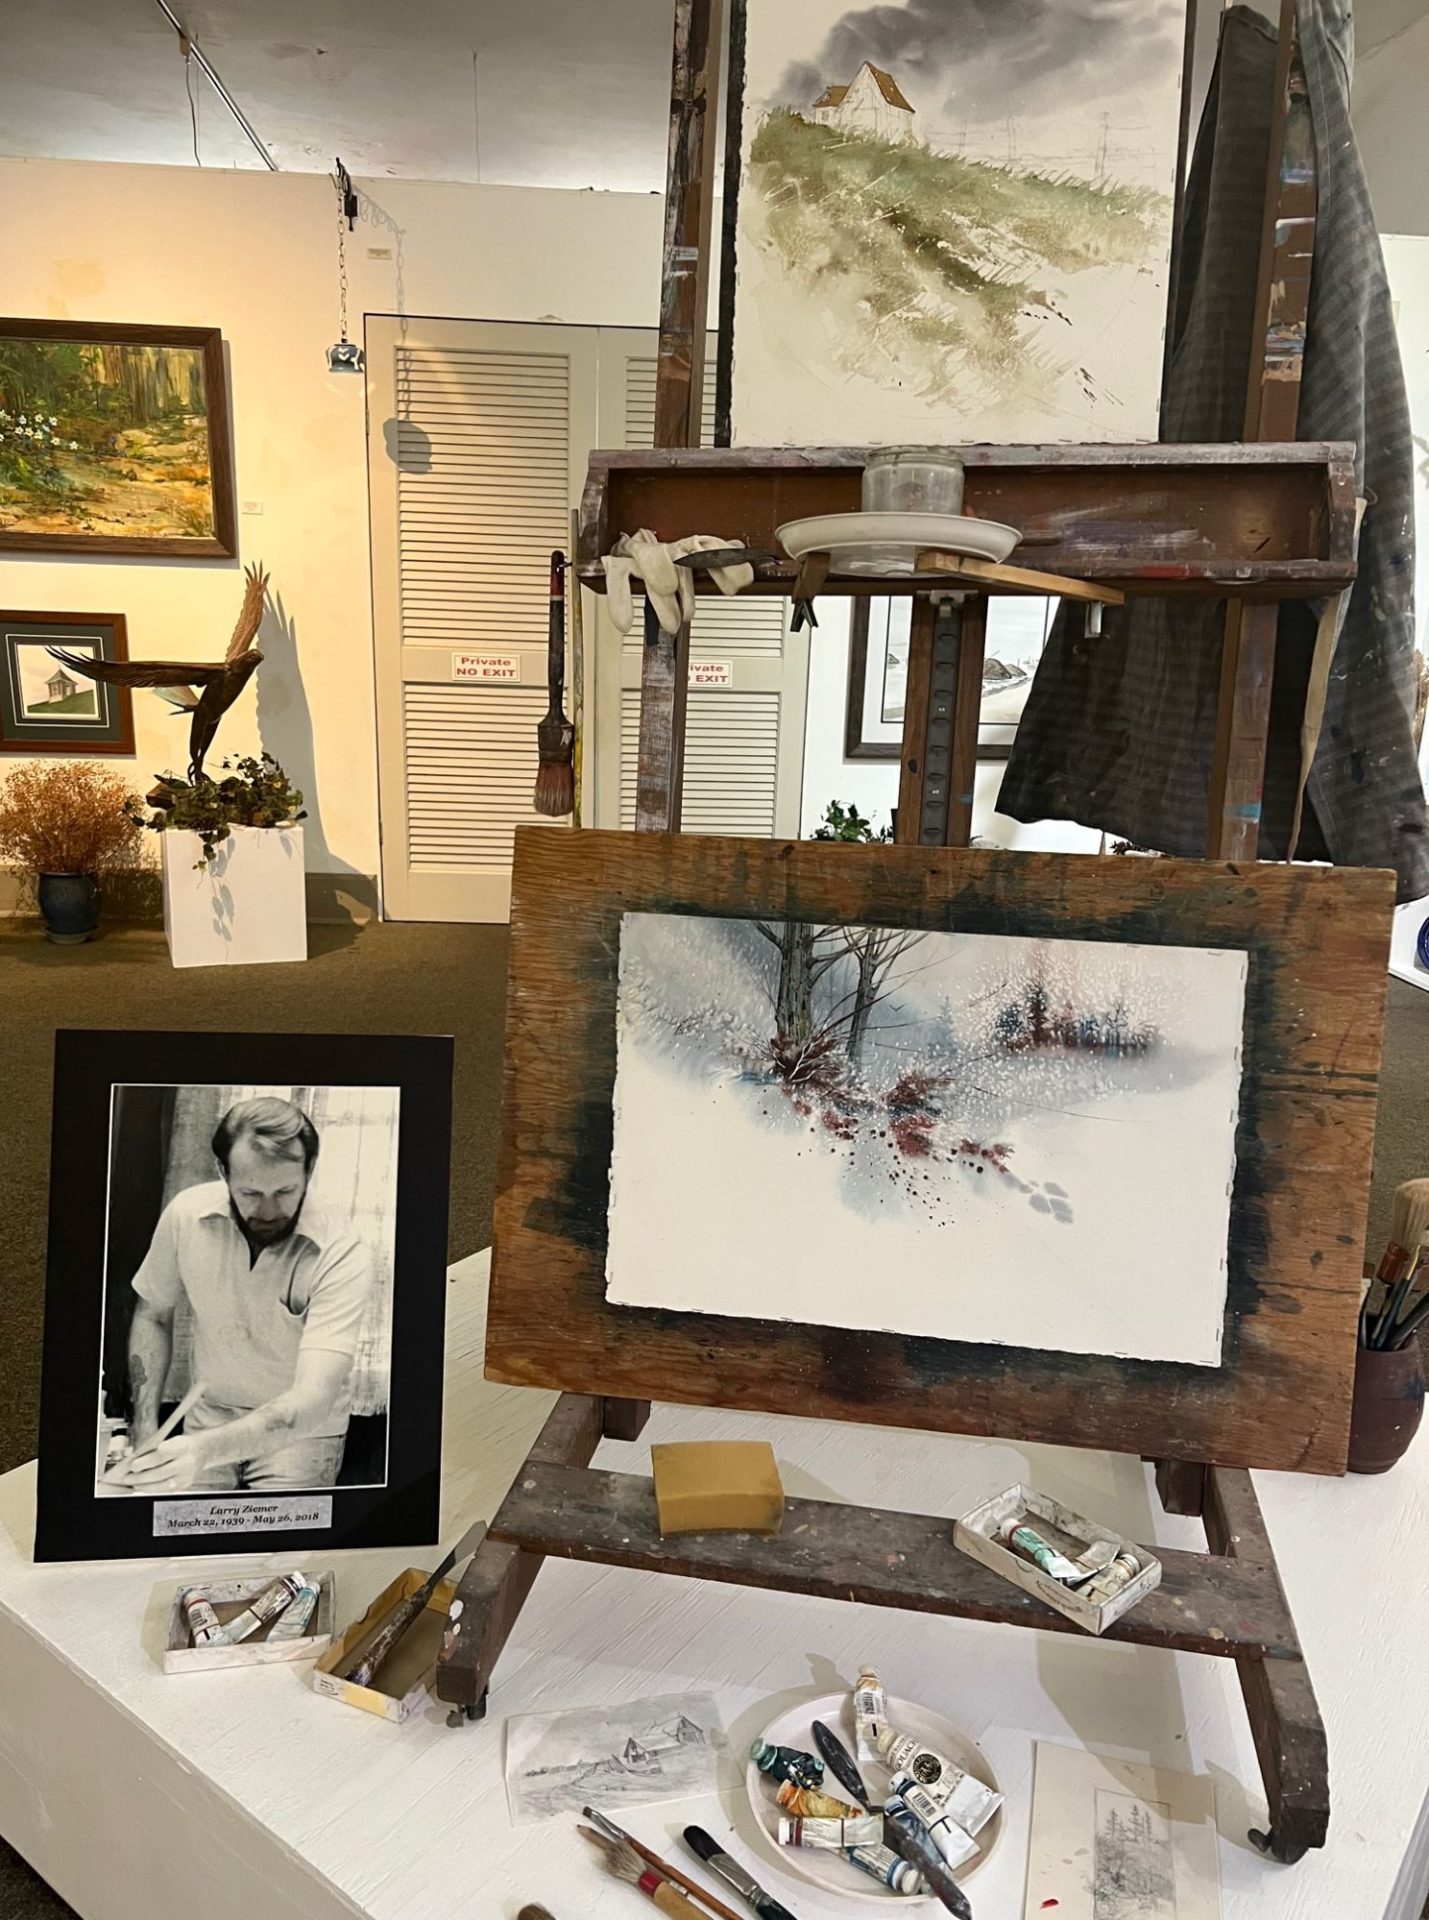 A display with a wooden easel with two paintings propped on it. There are tubes of paint and brushes scattered below it. A black and white photo of a man painting sits alongside it.